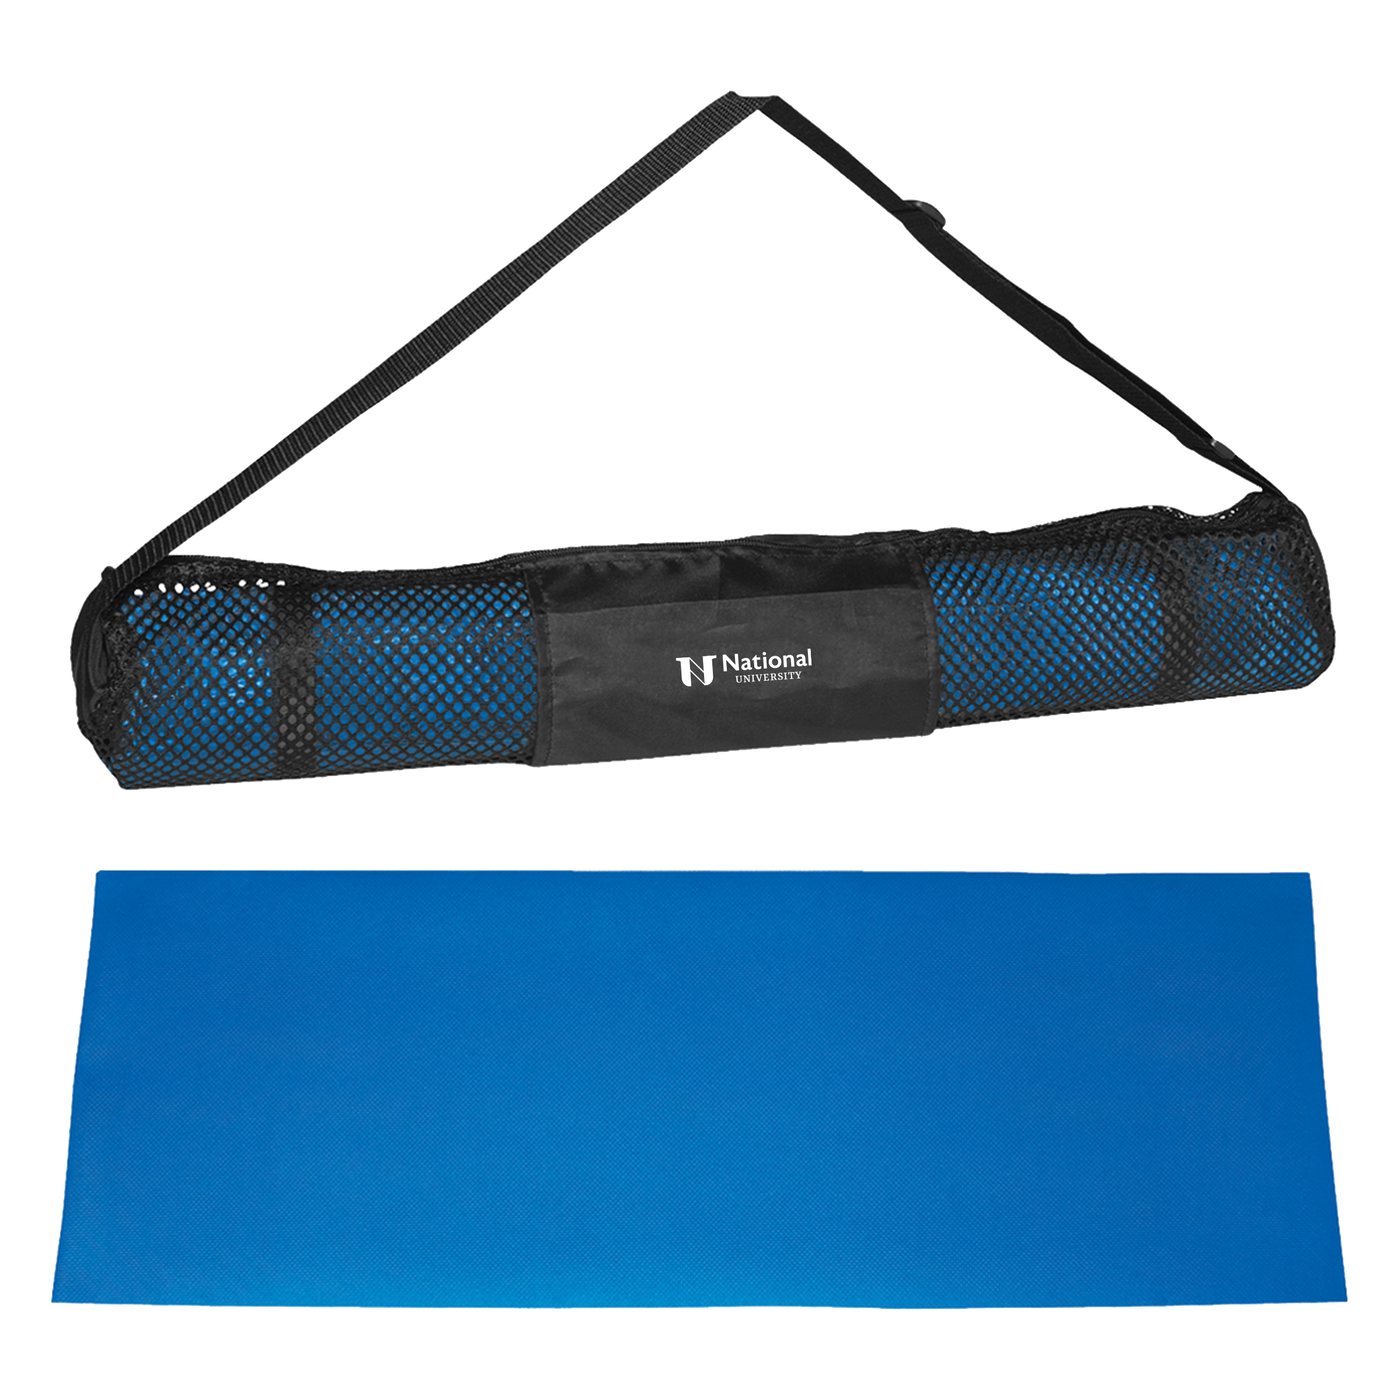 YOGA MAT AND CARRYING CASE